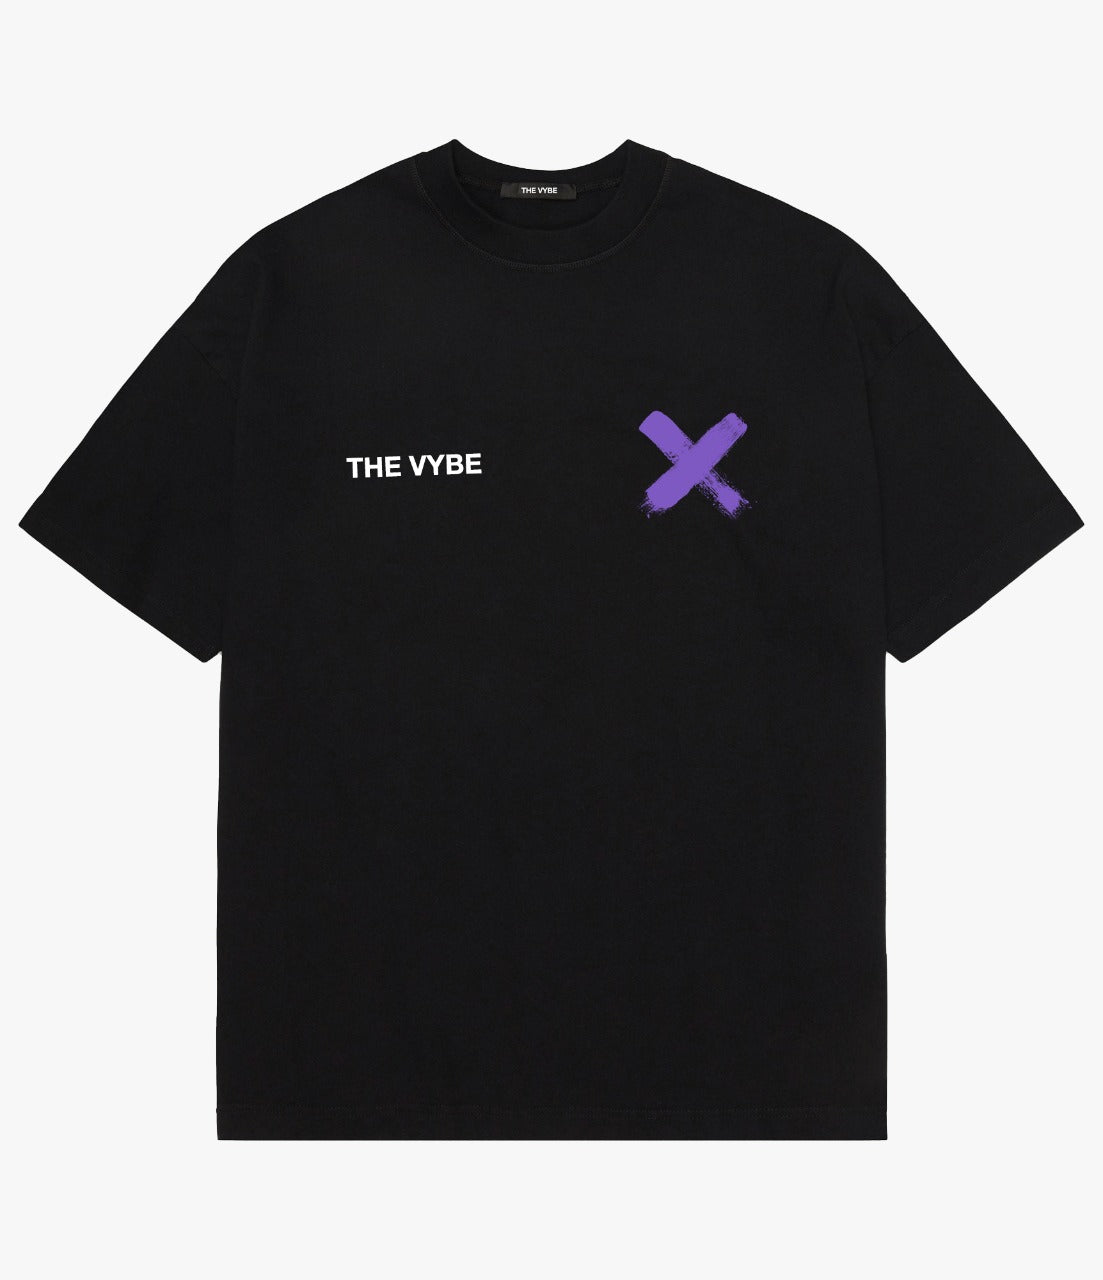 THE VYBE OBSIDIAN FORBIDDEN T-shirt